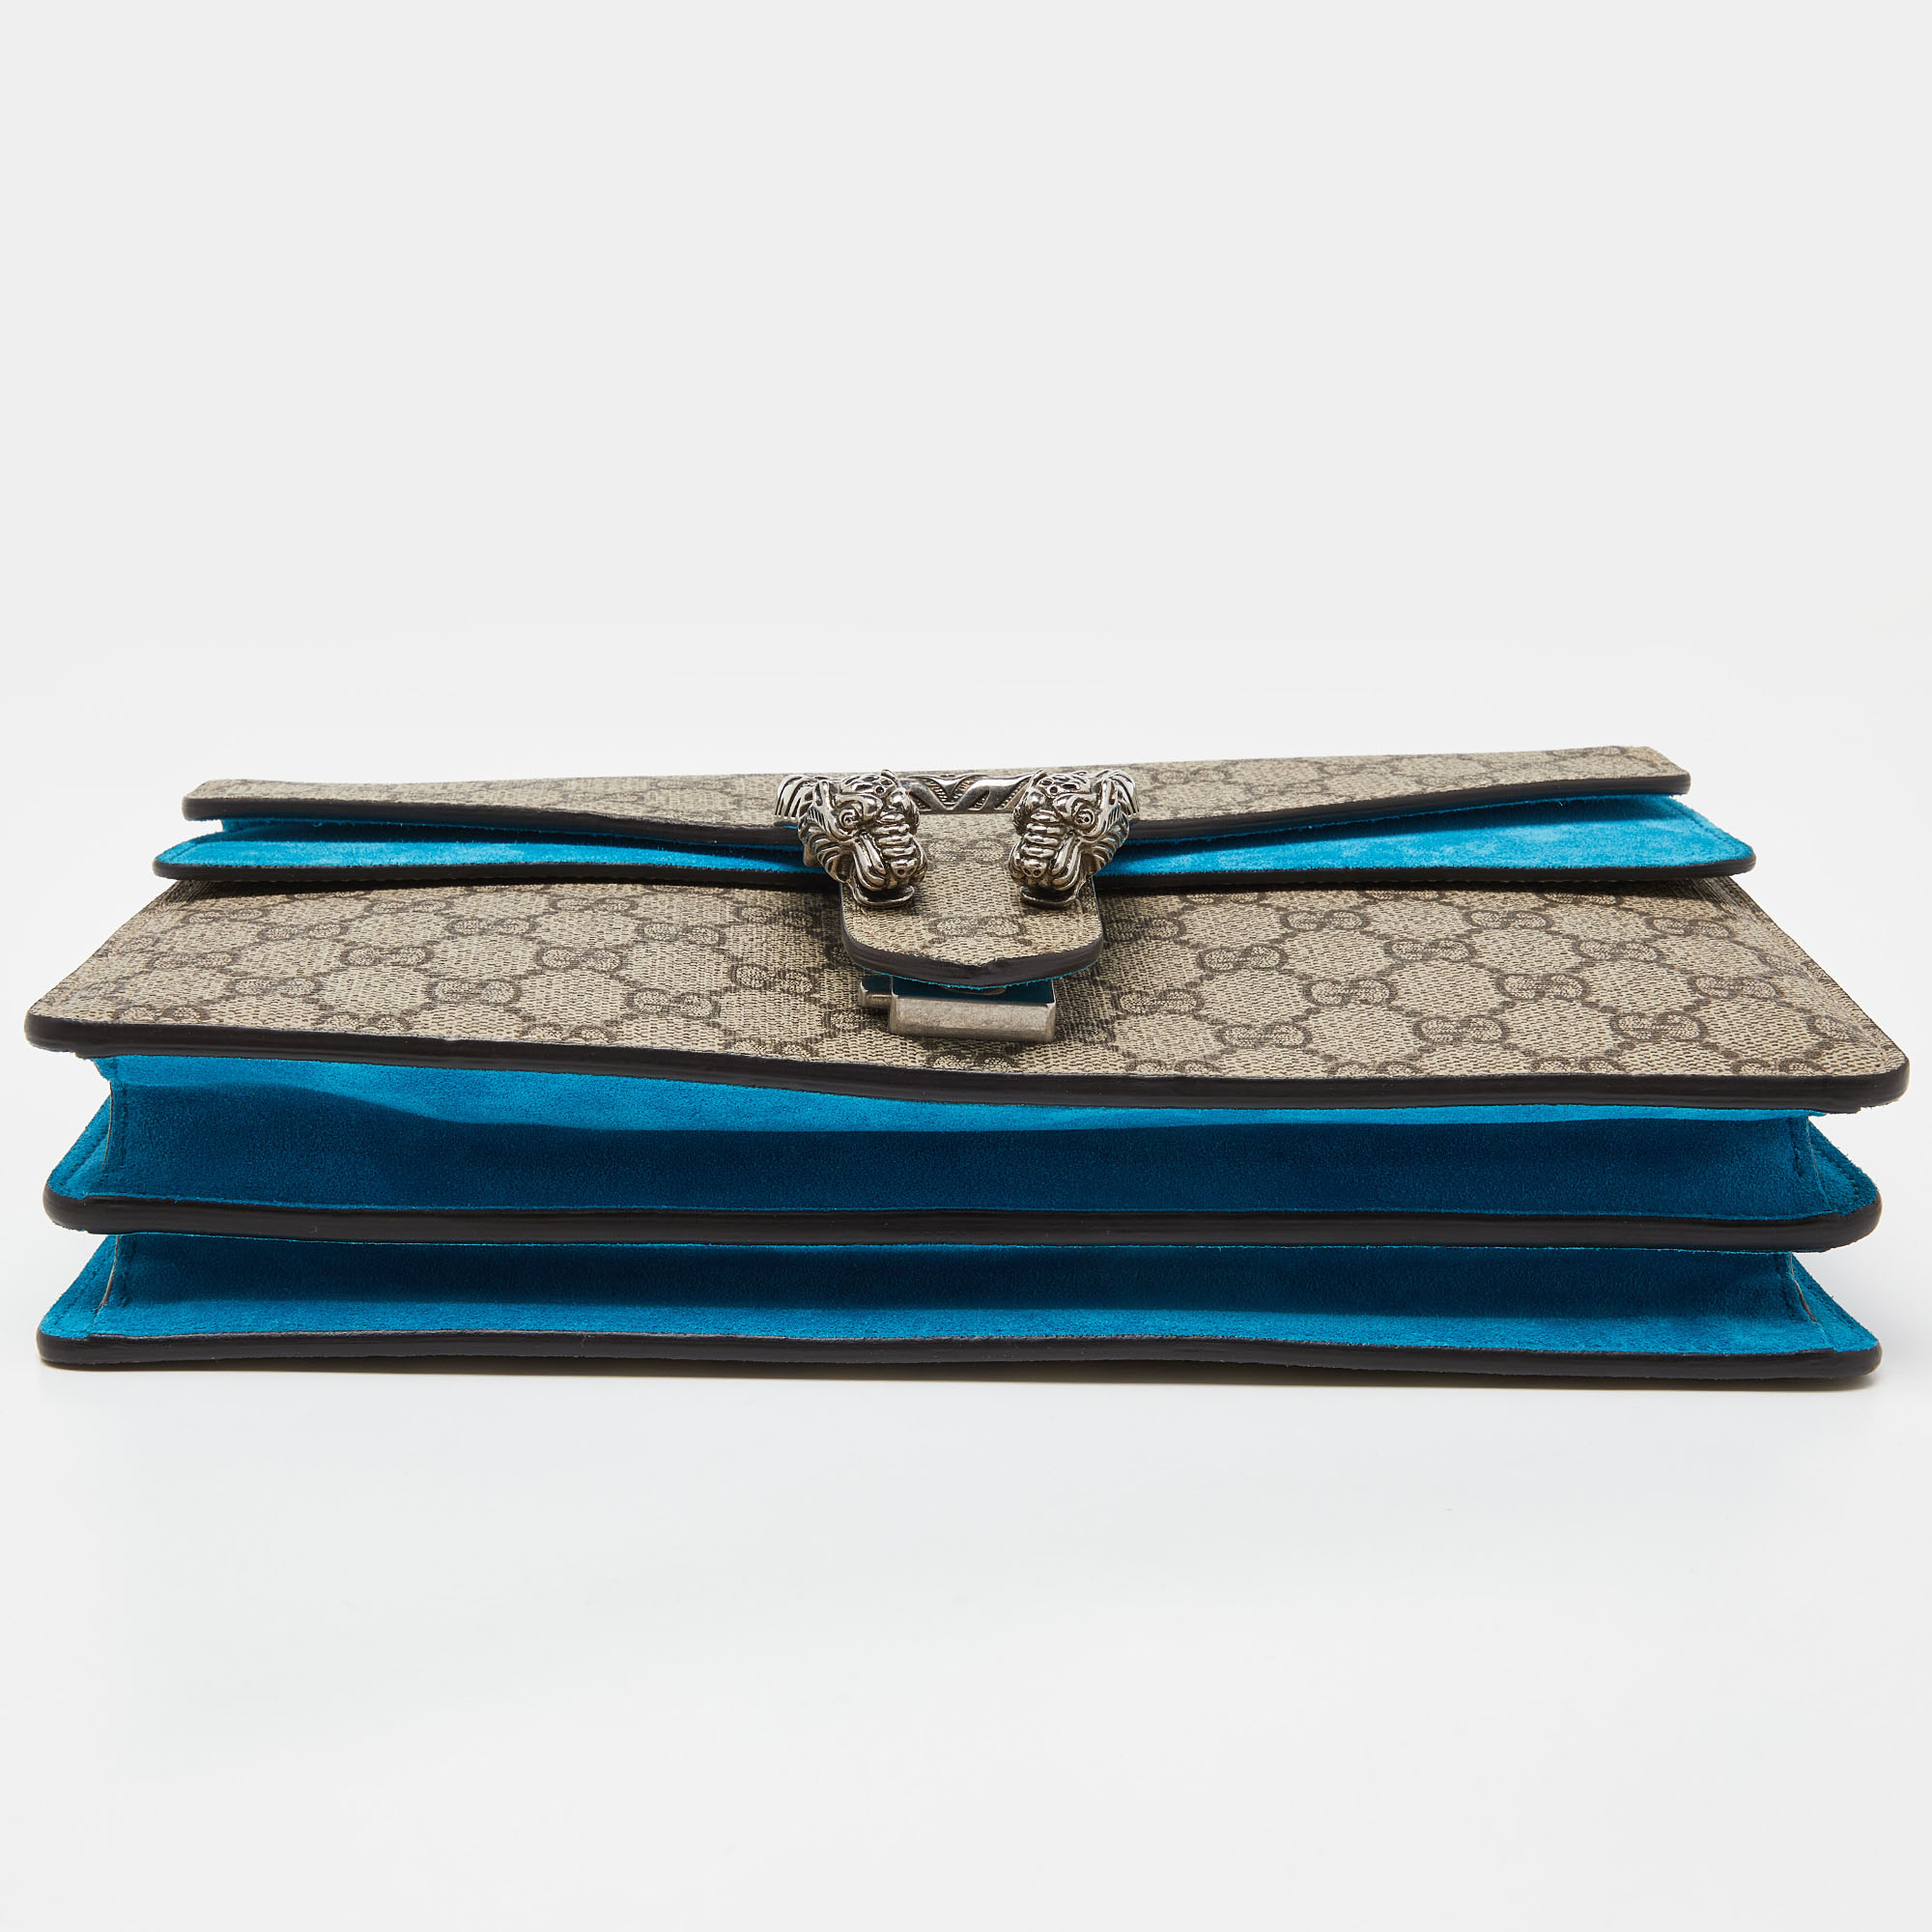 Gucci Beige/Blue GG Supreme Canvas And Suede Small Dionysus Shoulder Bag